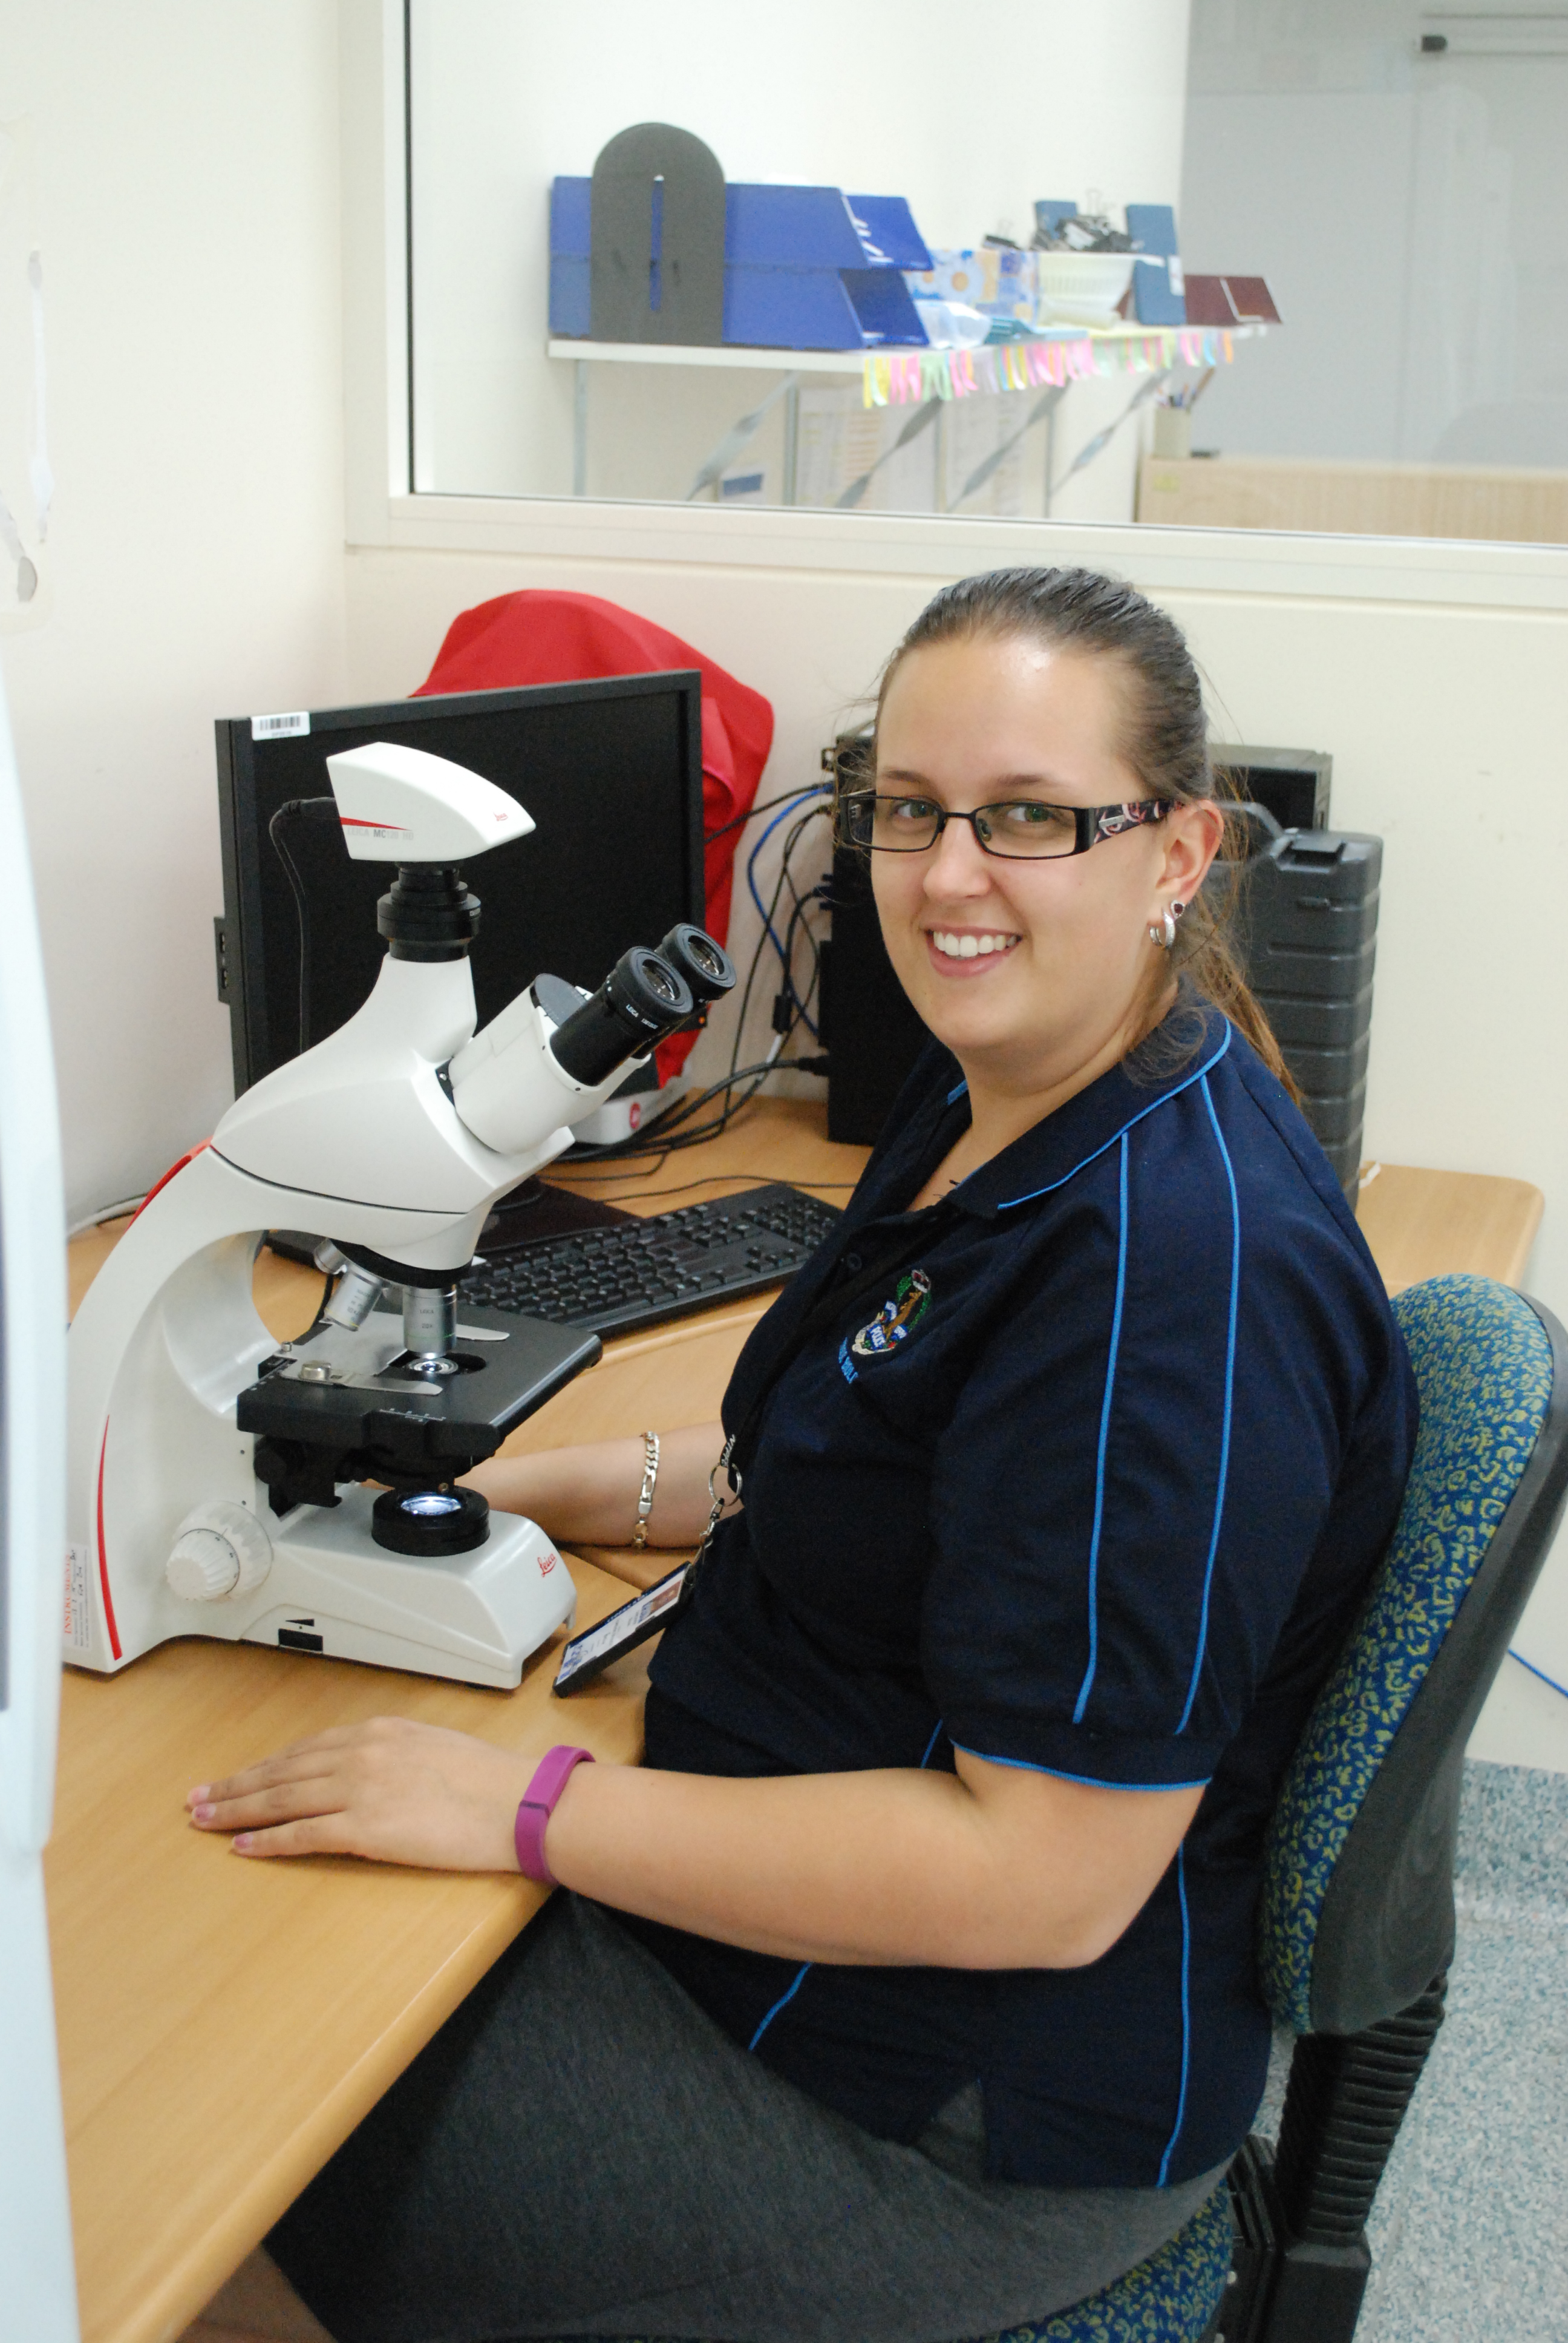 Nicole Gardiner is working as a forensic biologist after graduating from Griffith.